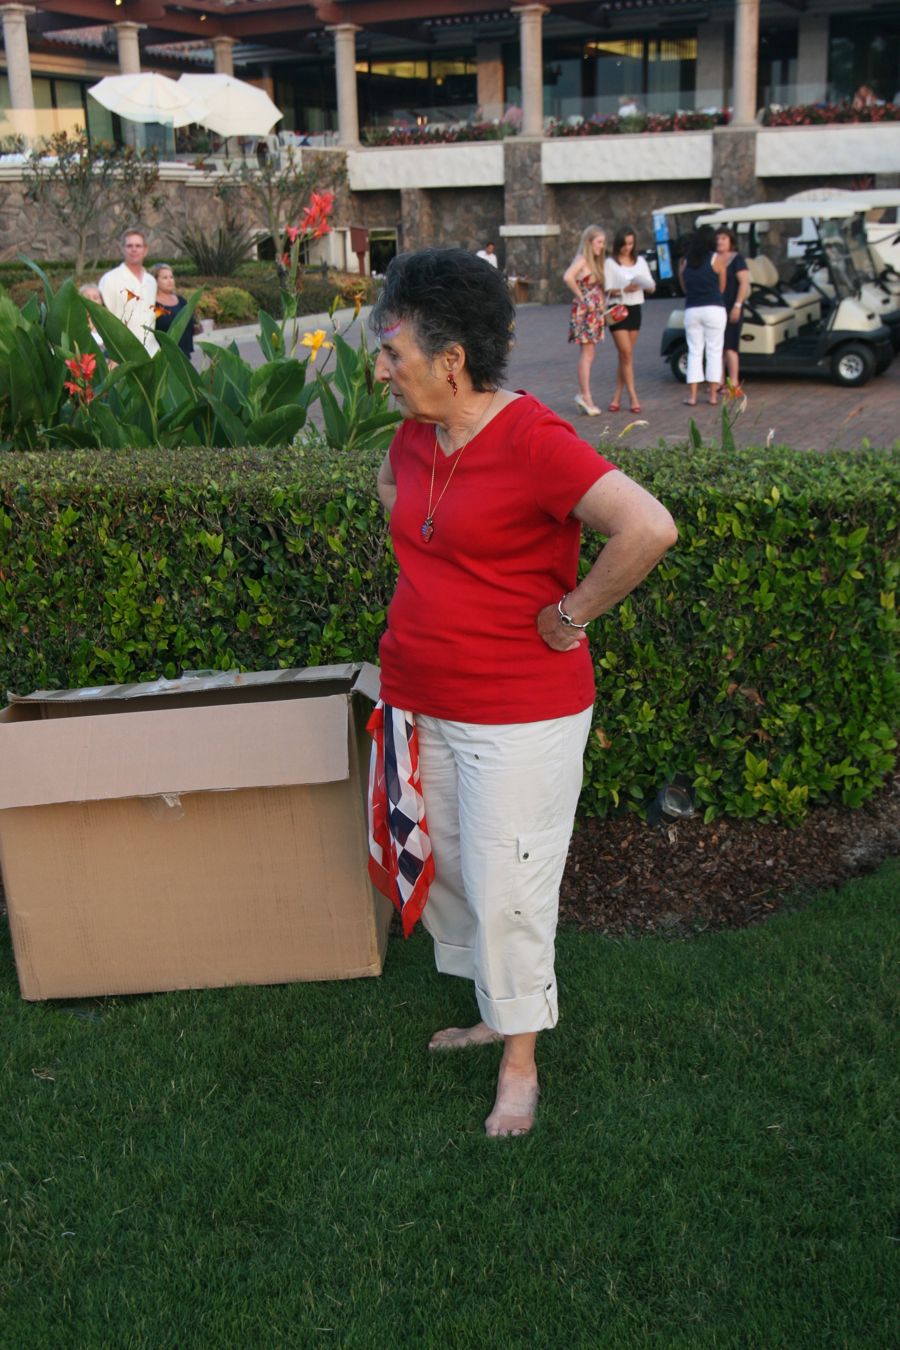 July 4th 2011 at Old Ranch Country Club